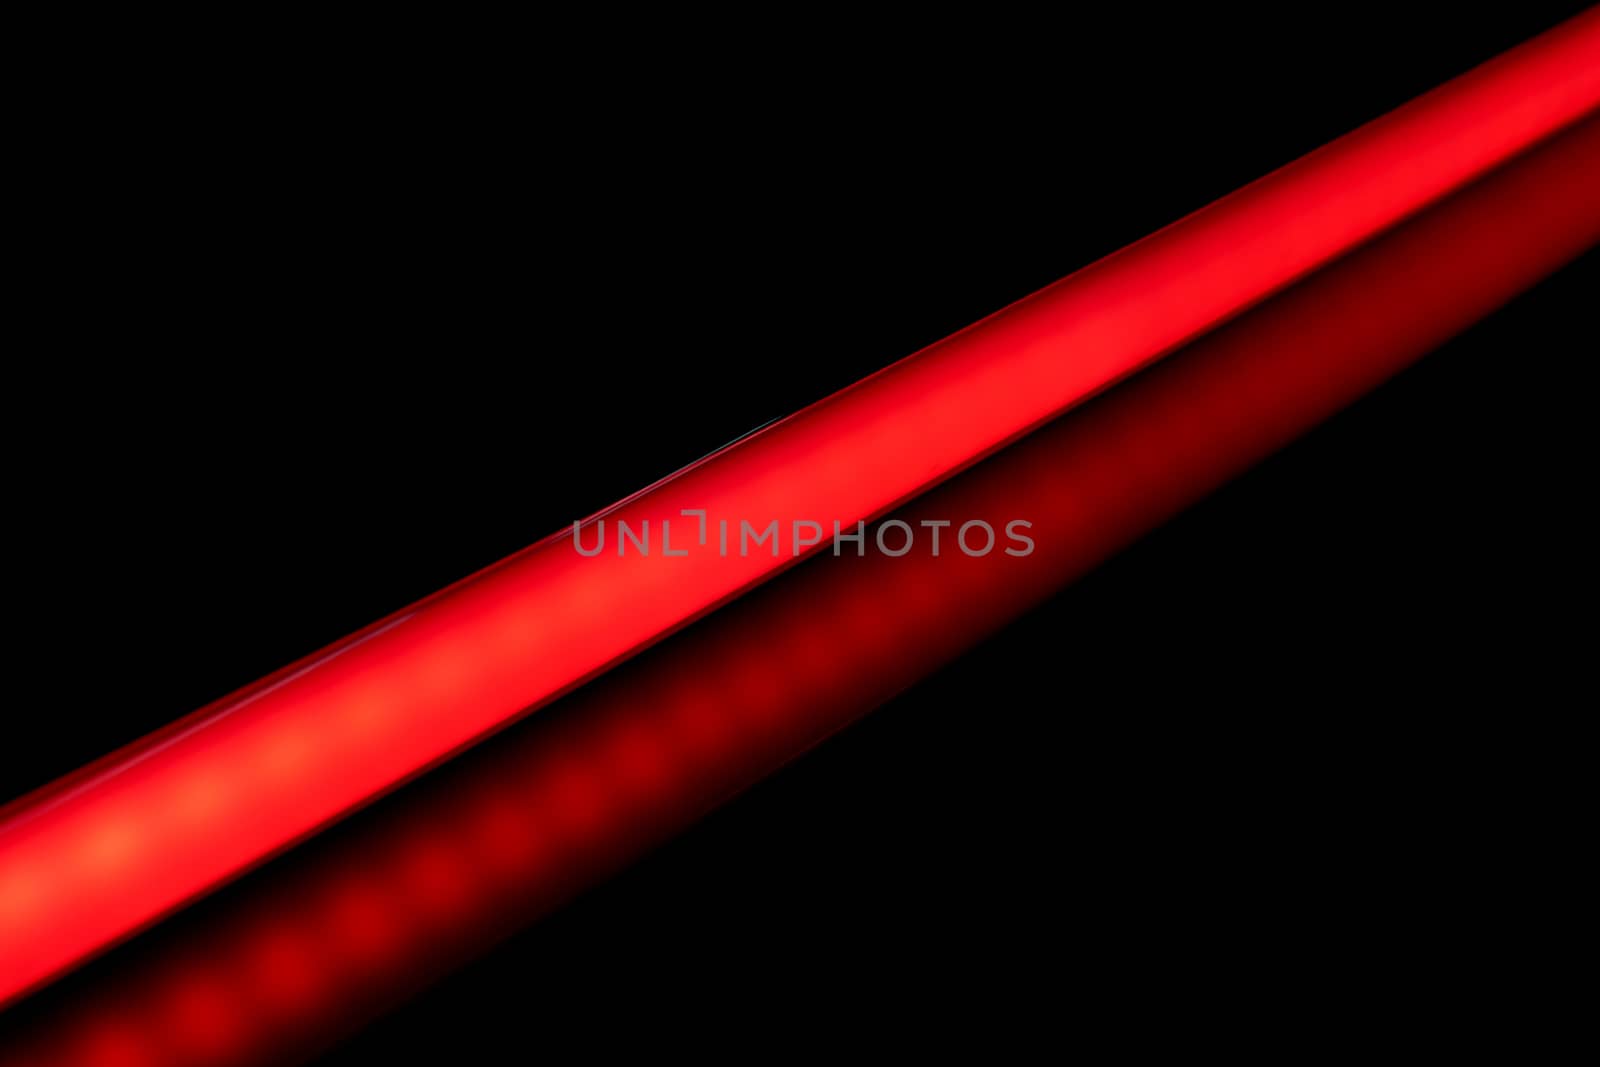 LED tube light bulb red color for photography and video on black background.